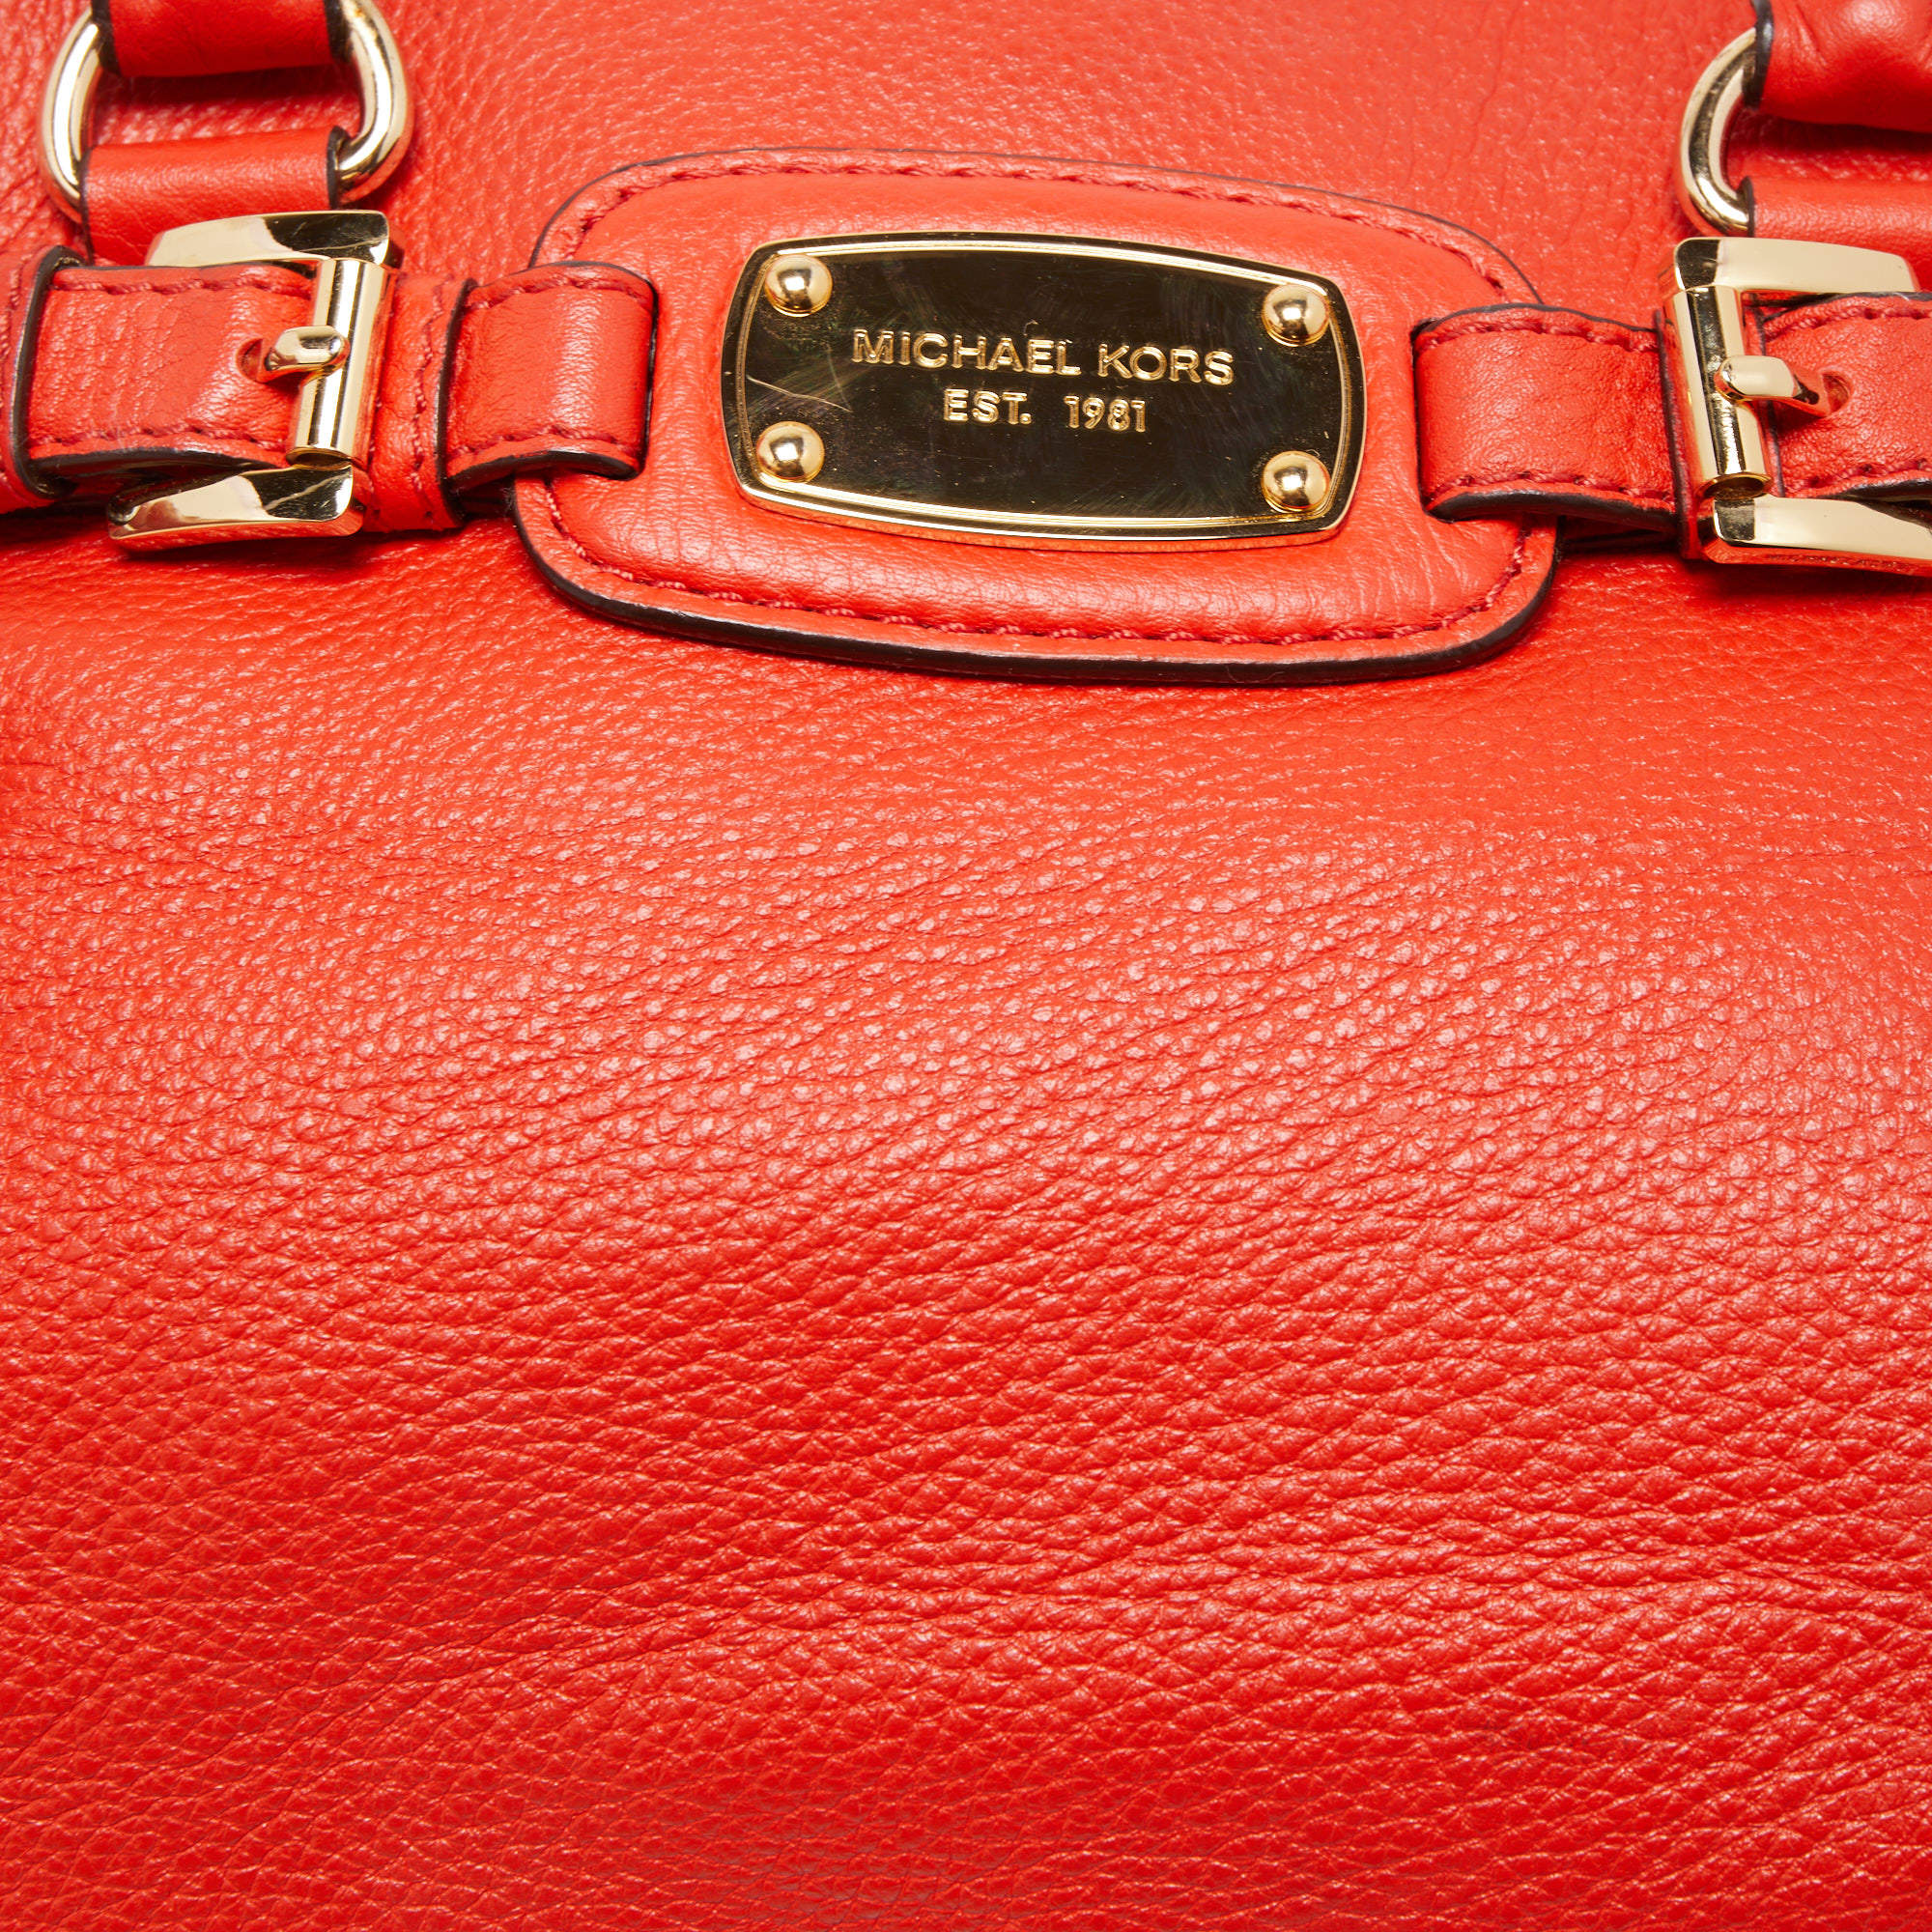 michael kors handbags red hamilton is there a outlet in denver